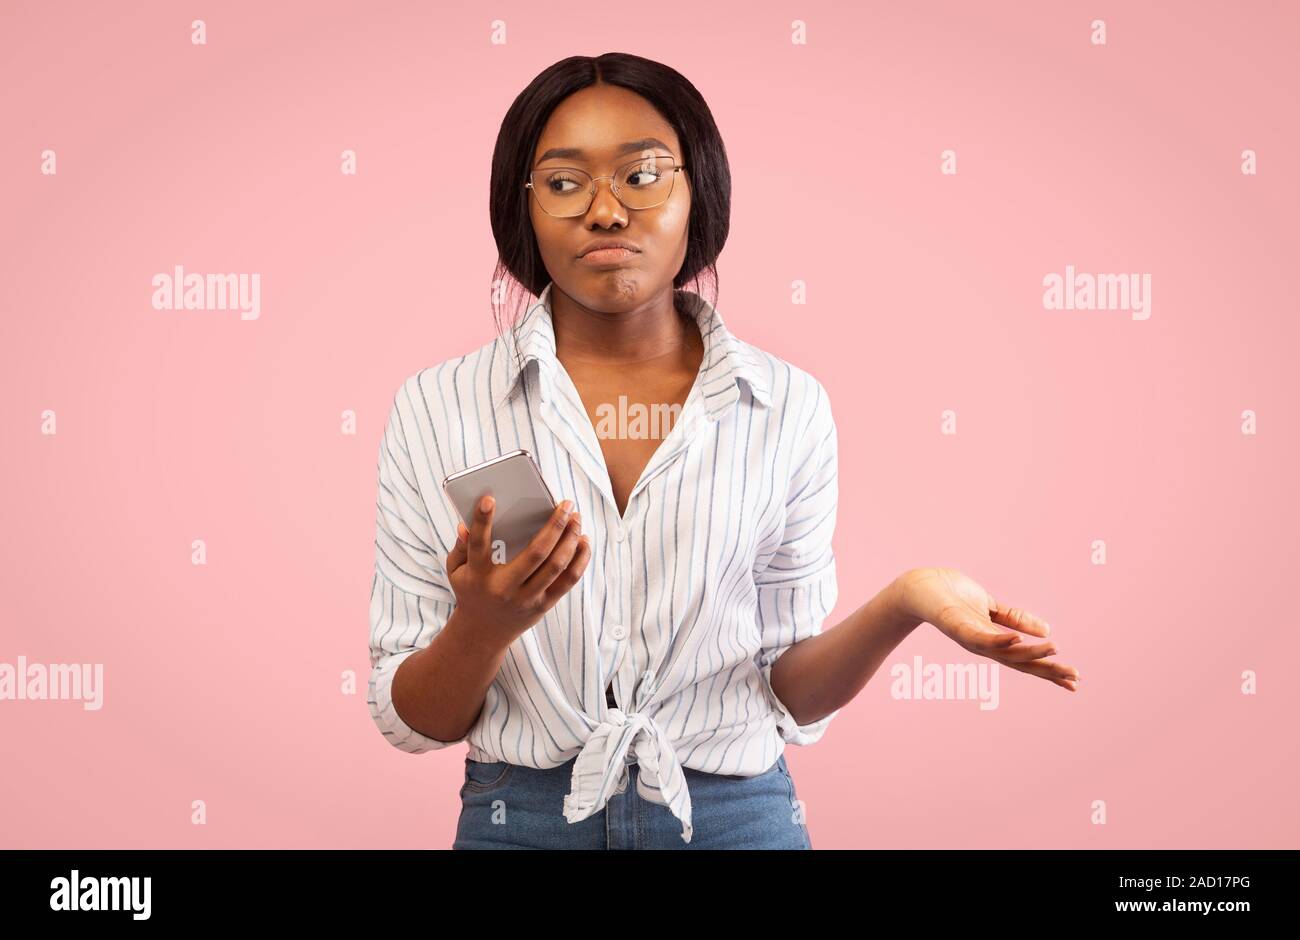 Discontented Afro Woman Holding Smartphone Shrugging Shoulders, Pink Studio Background Stock Photo